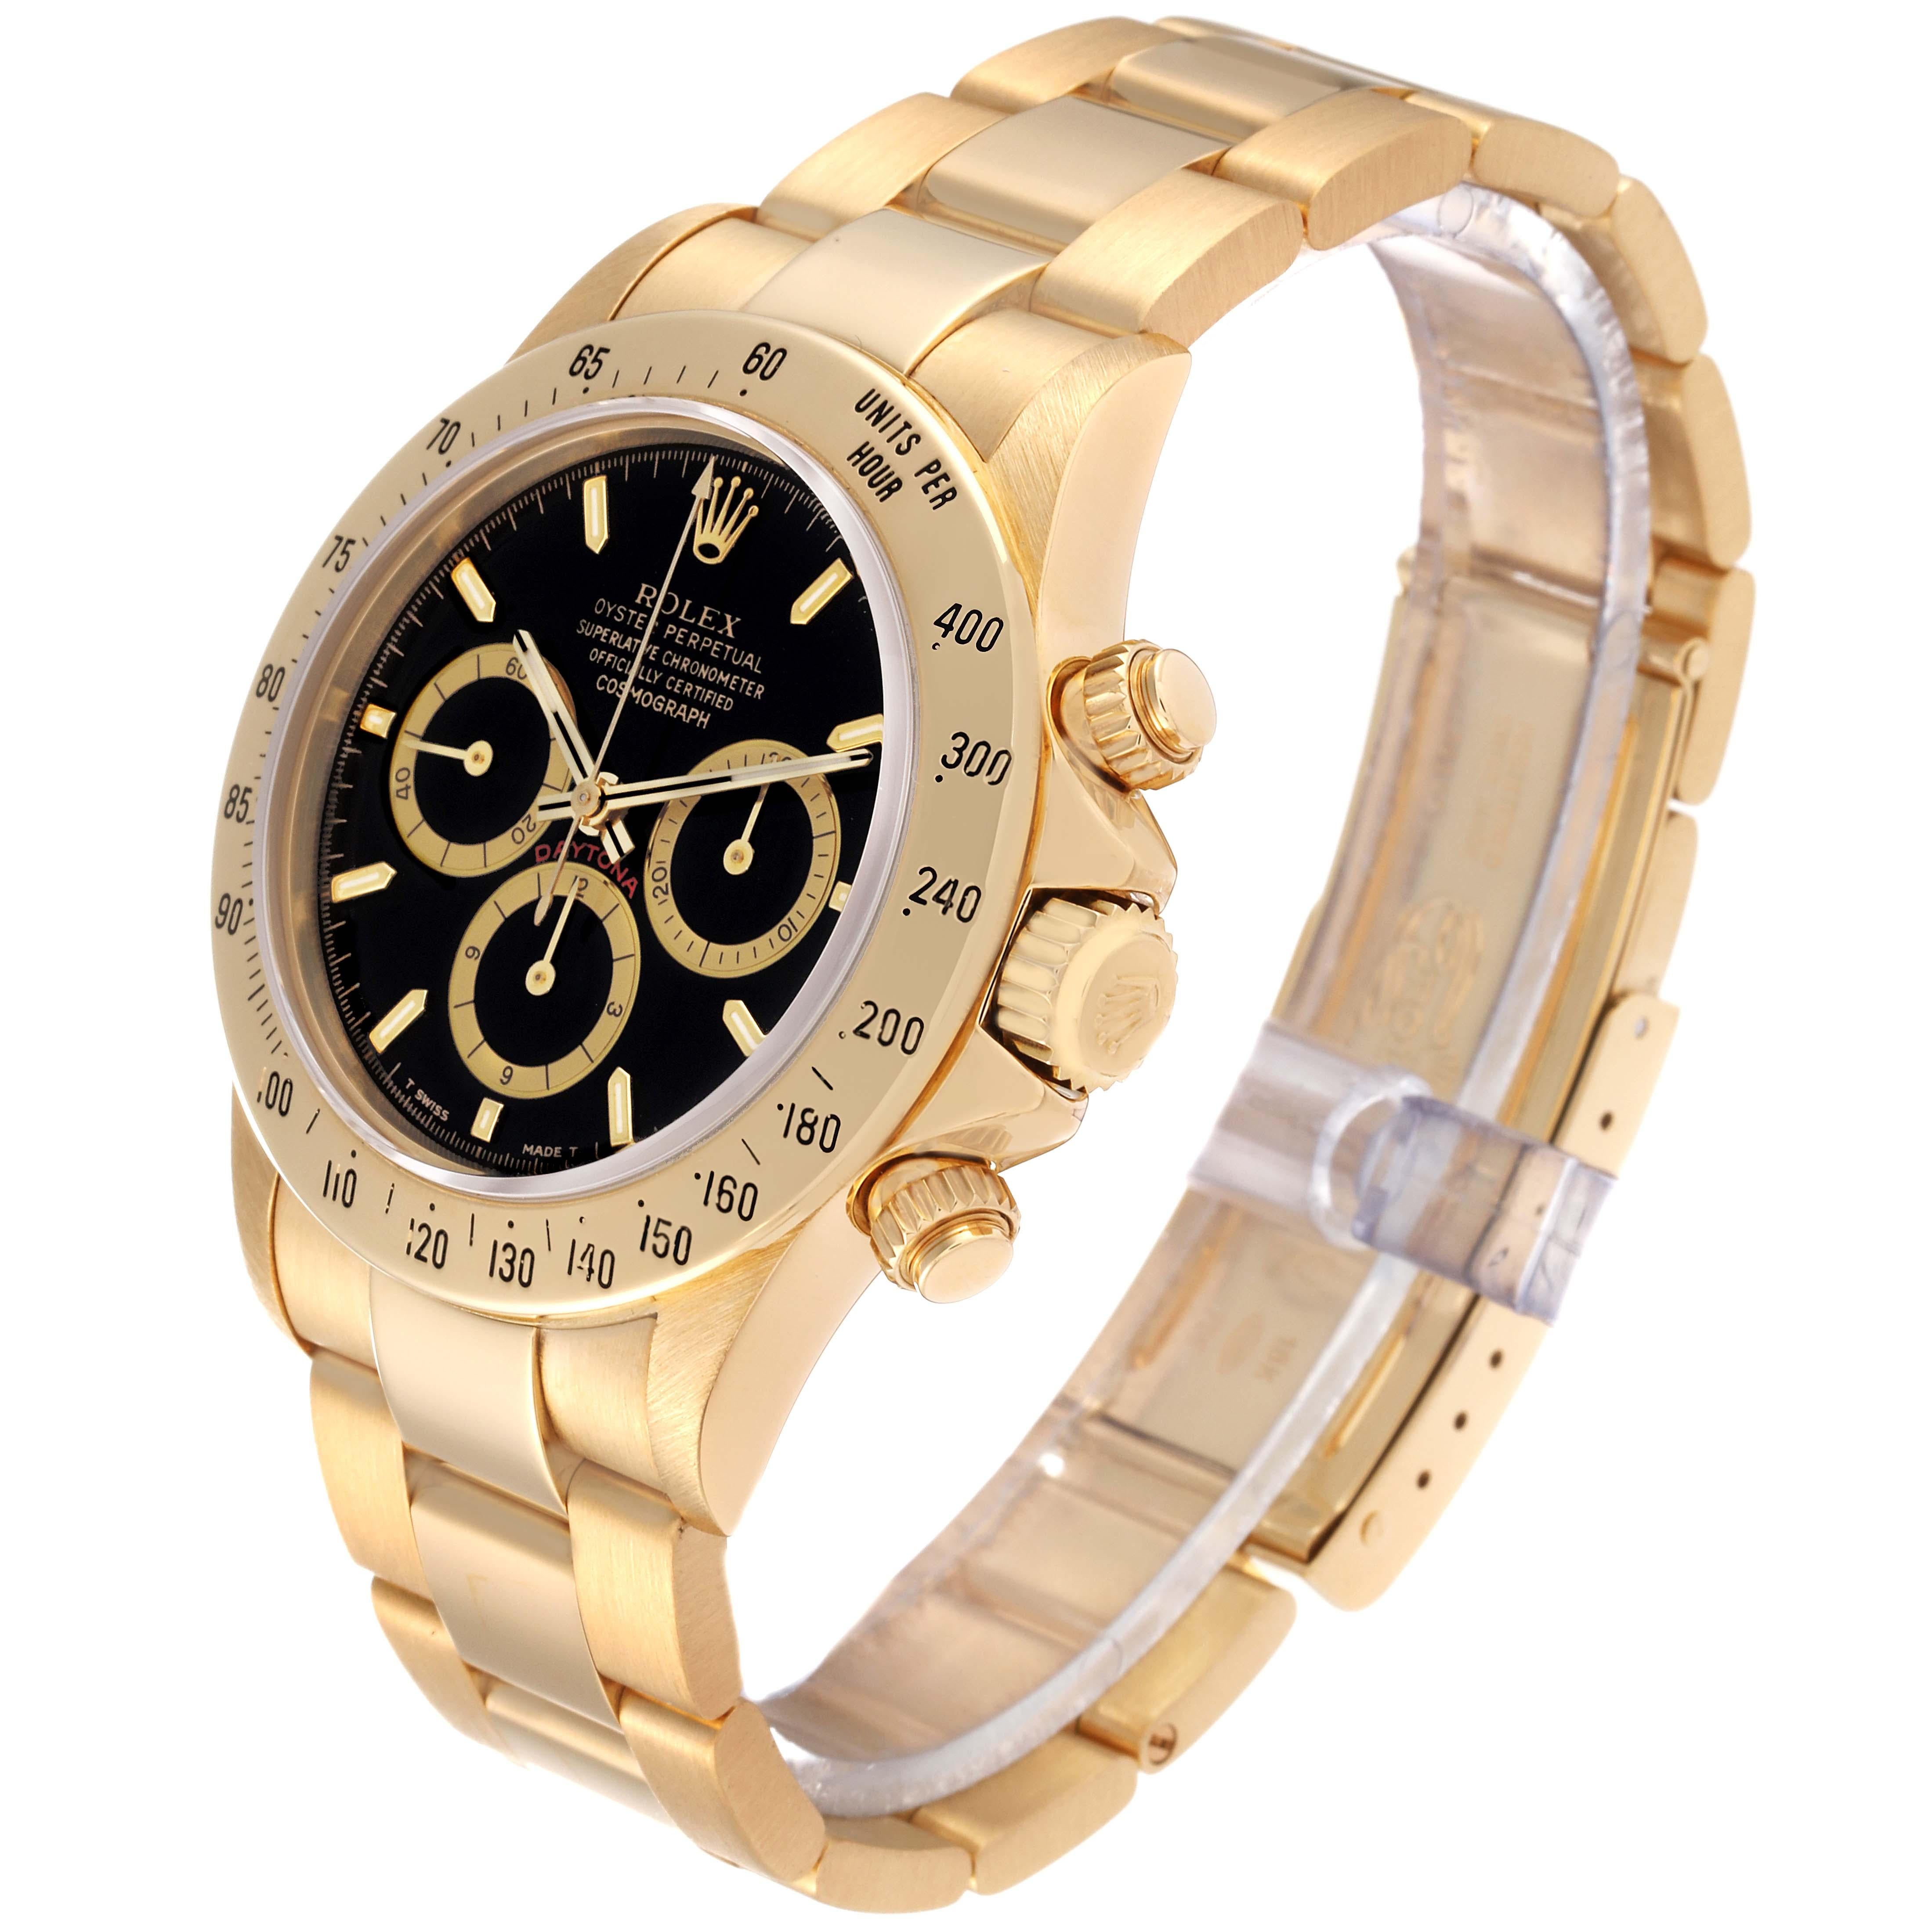 Rolex Daytona Yellow Gold Chronograph Mens Watch 16528 In Excellent Condition For Sale In Atlanta, GA